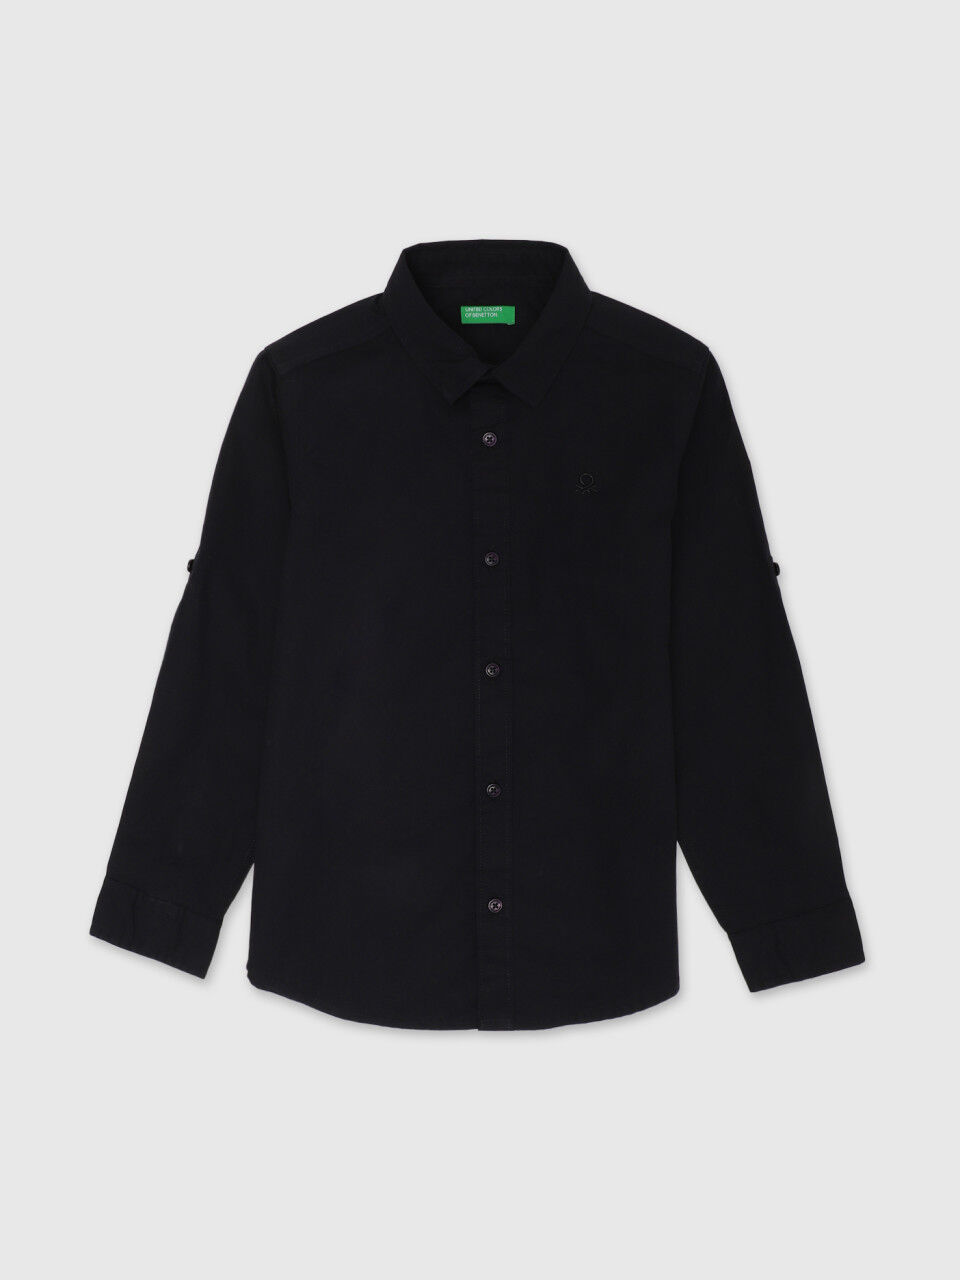 United Colors Of Benetton Boys Long Sleeve Solid Shirt